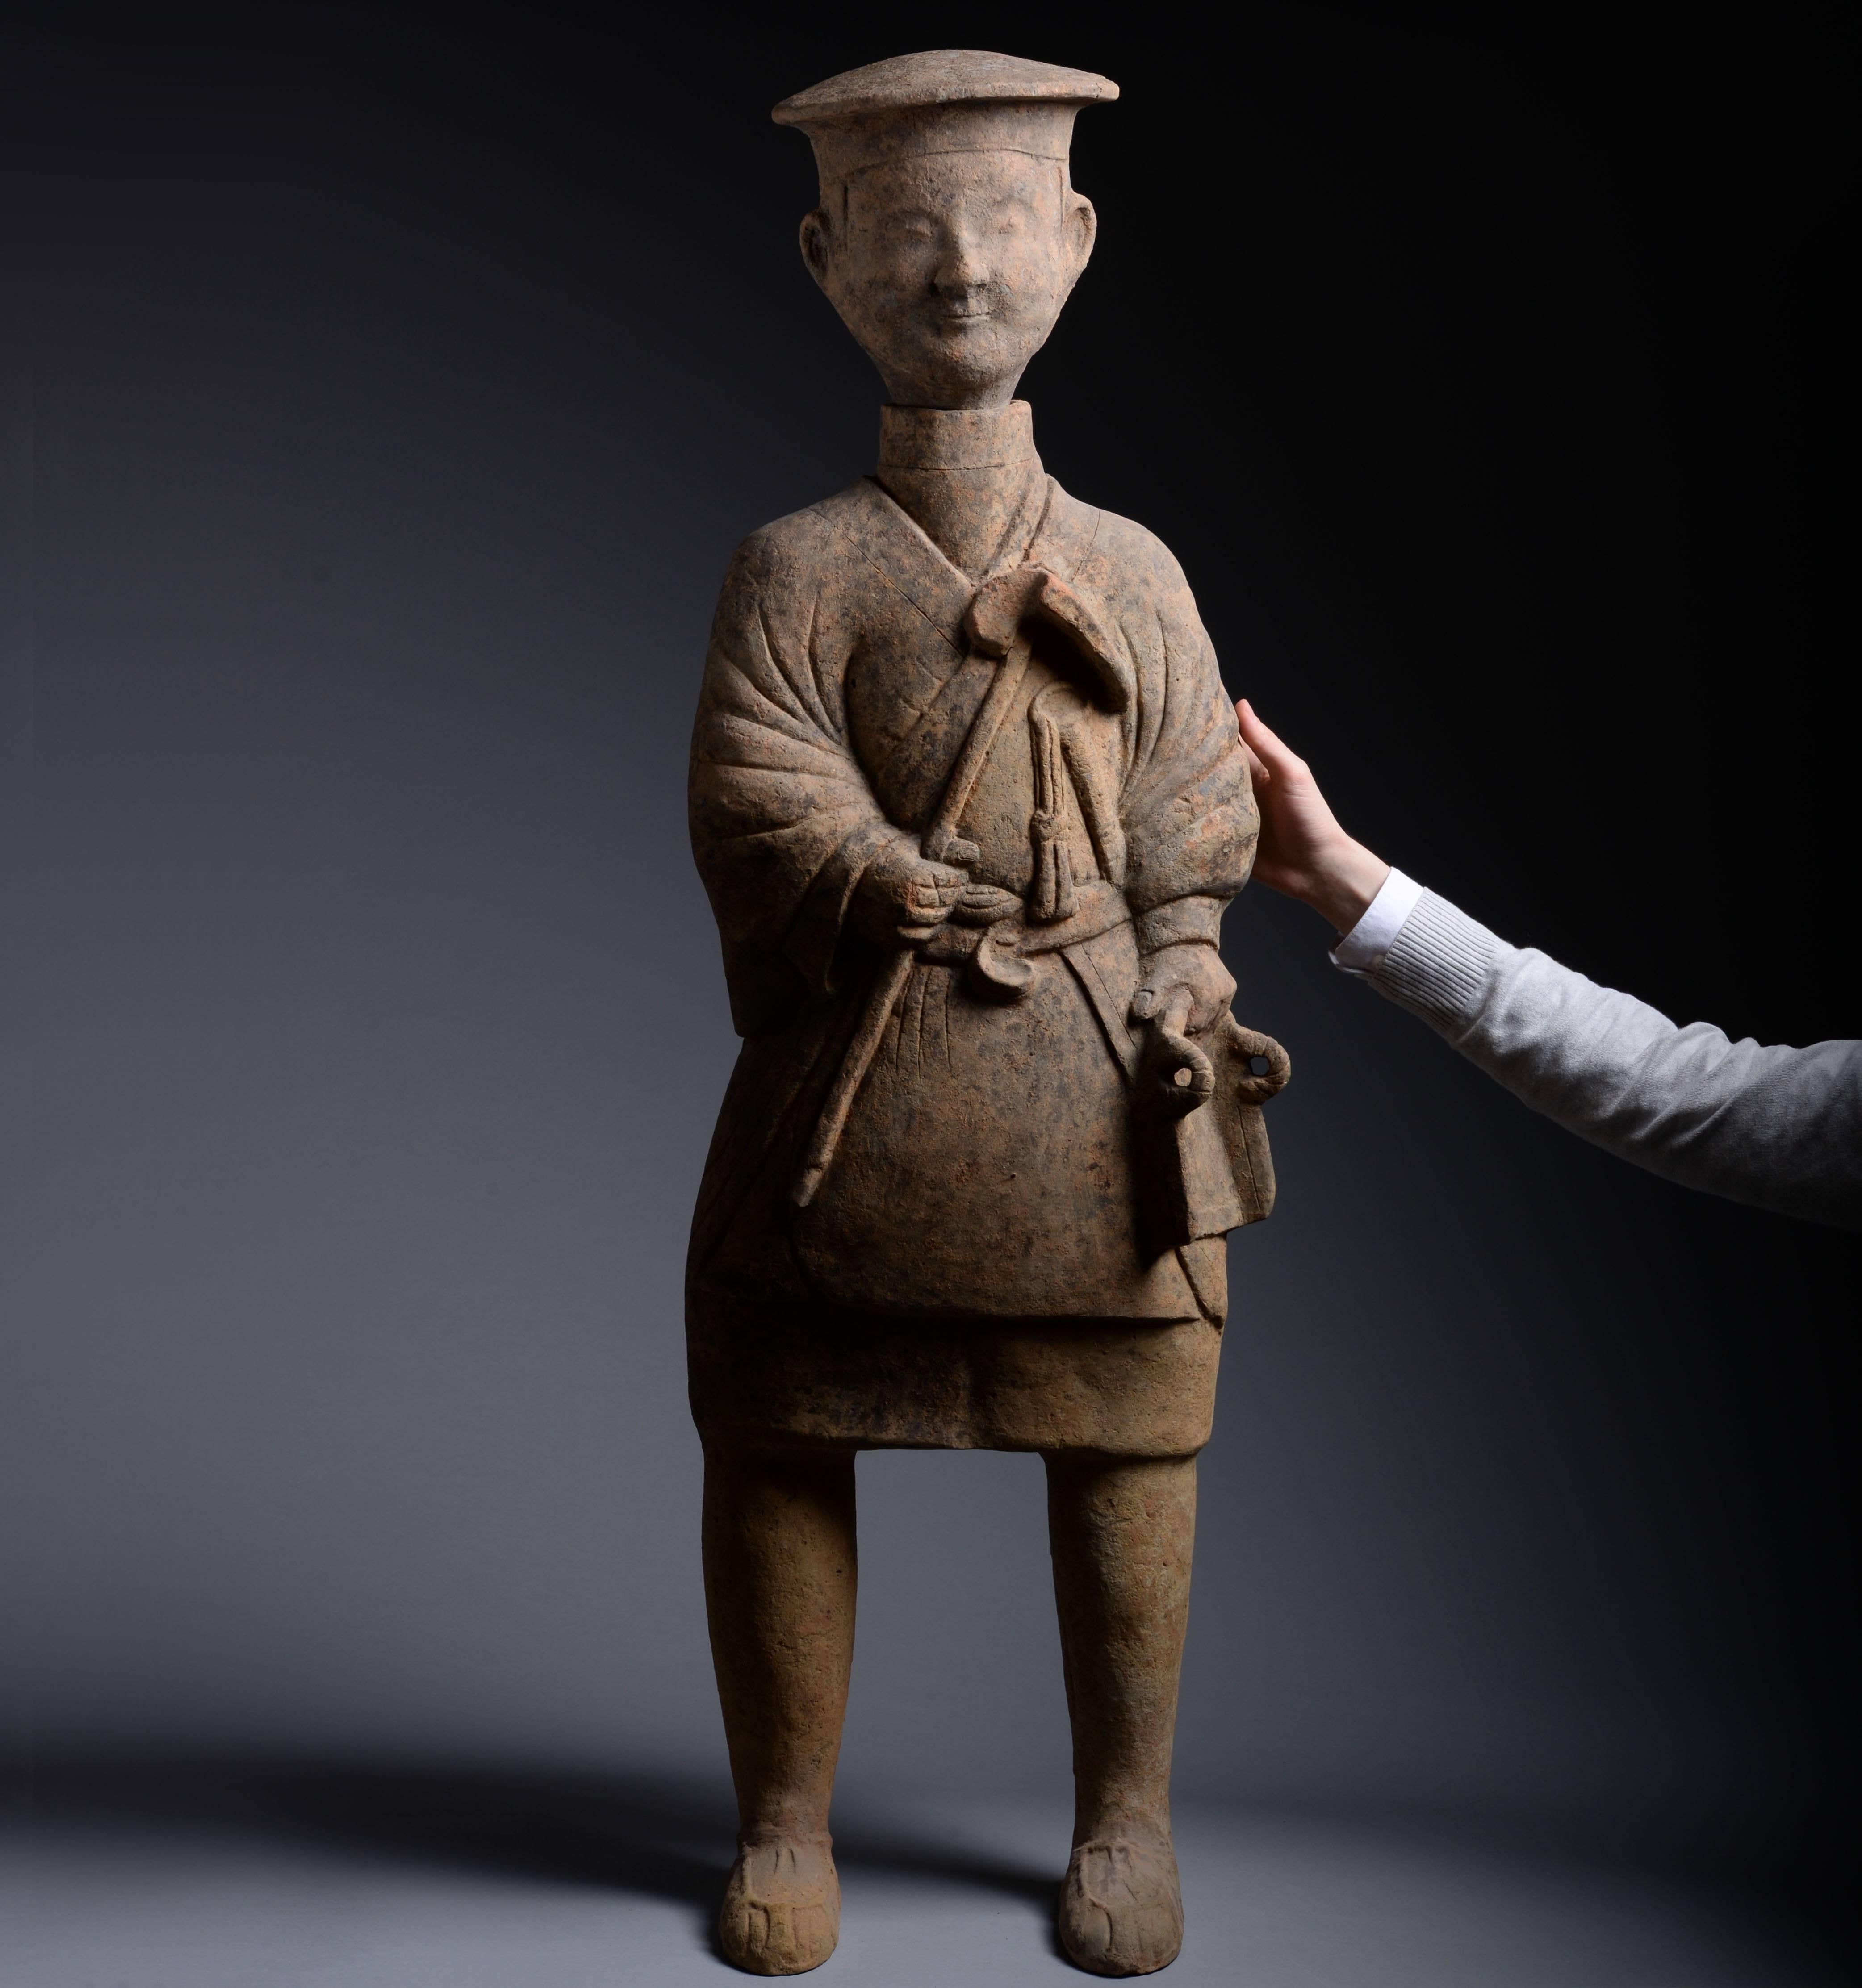 An ancient Chinese Eastern Han dynasty terracotta figure of a farmer, likely from Sichuan province and dating to 25–220 AD.

Standing at almost four feet tall, this decorative sculpture towers over most terracotta figures produced during the Han